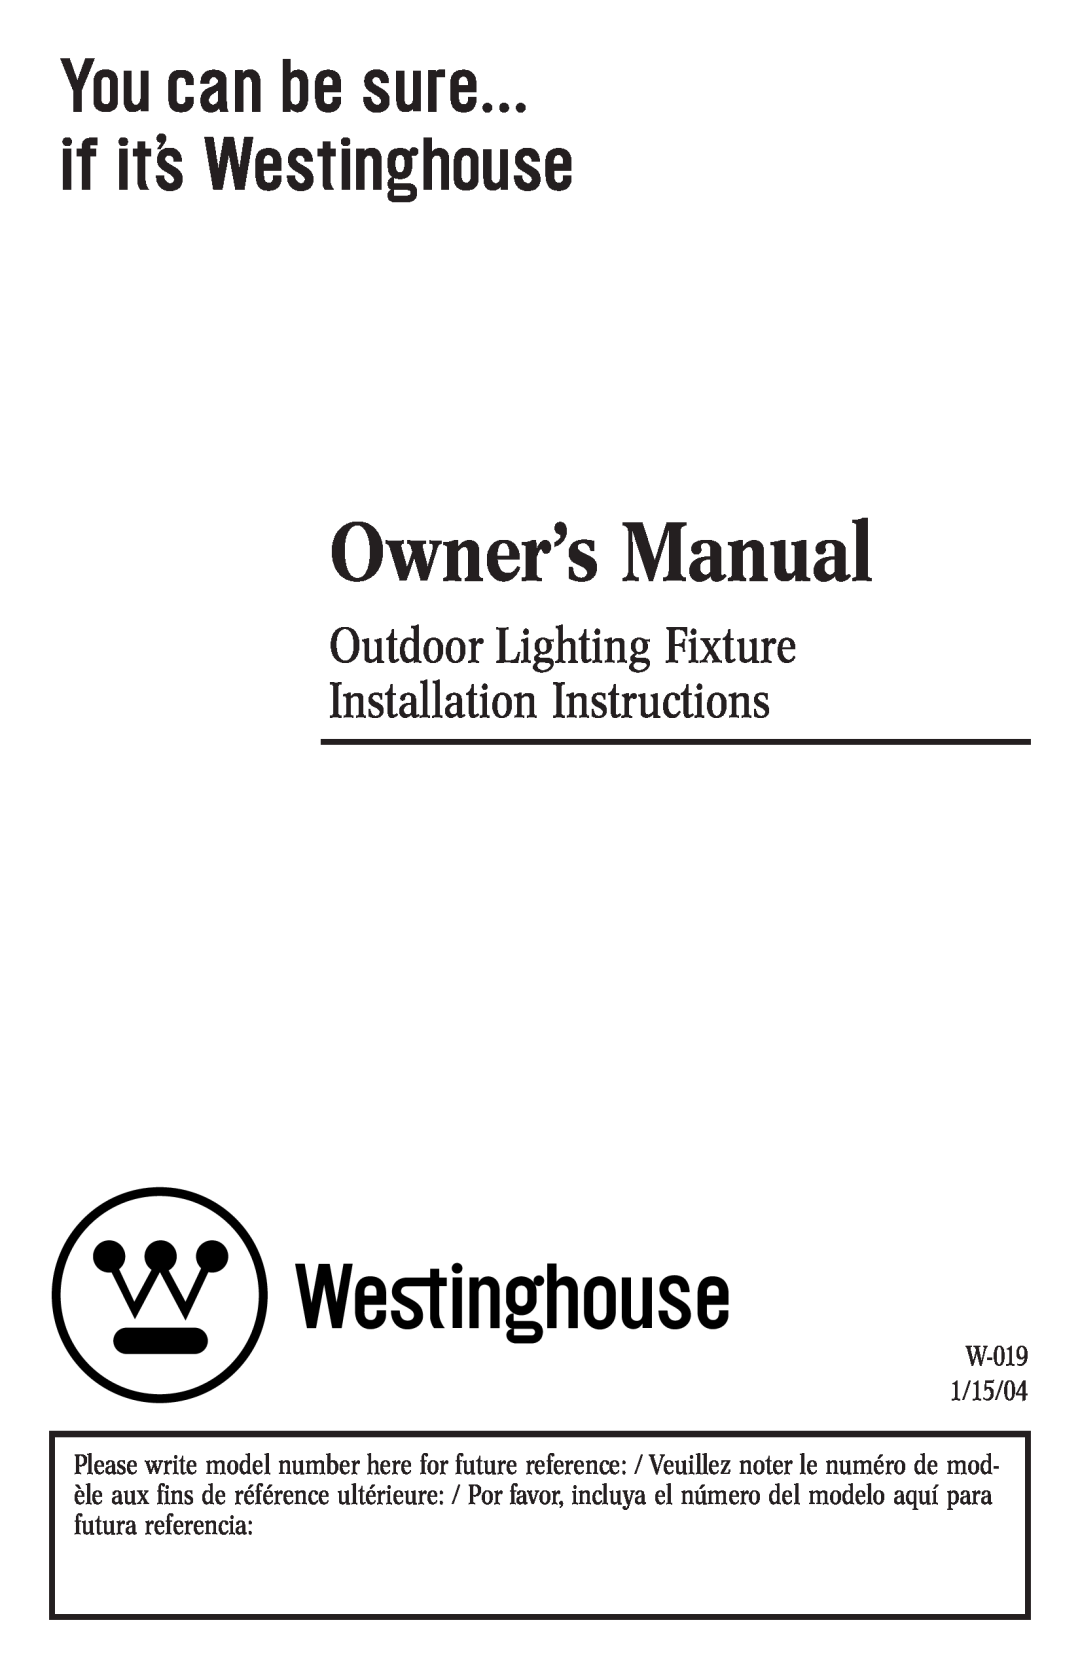 Westinghouse W-019 owner manual Owner’s Manual, Outdoor Lighting Fixture Installation Instructions 